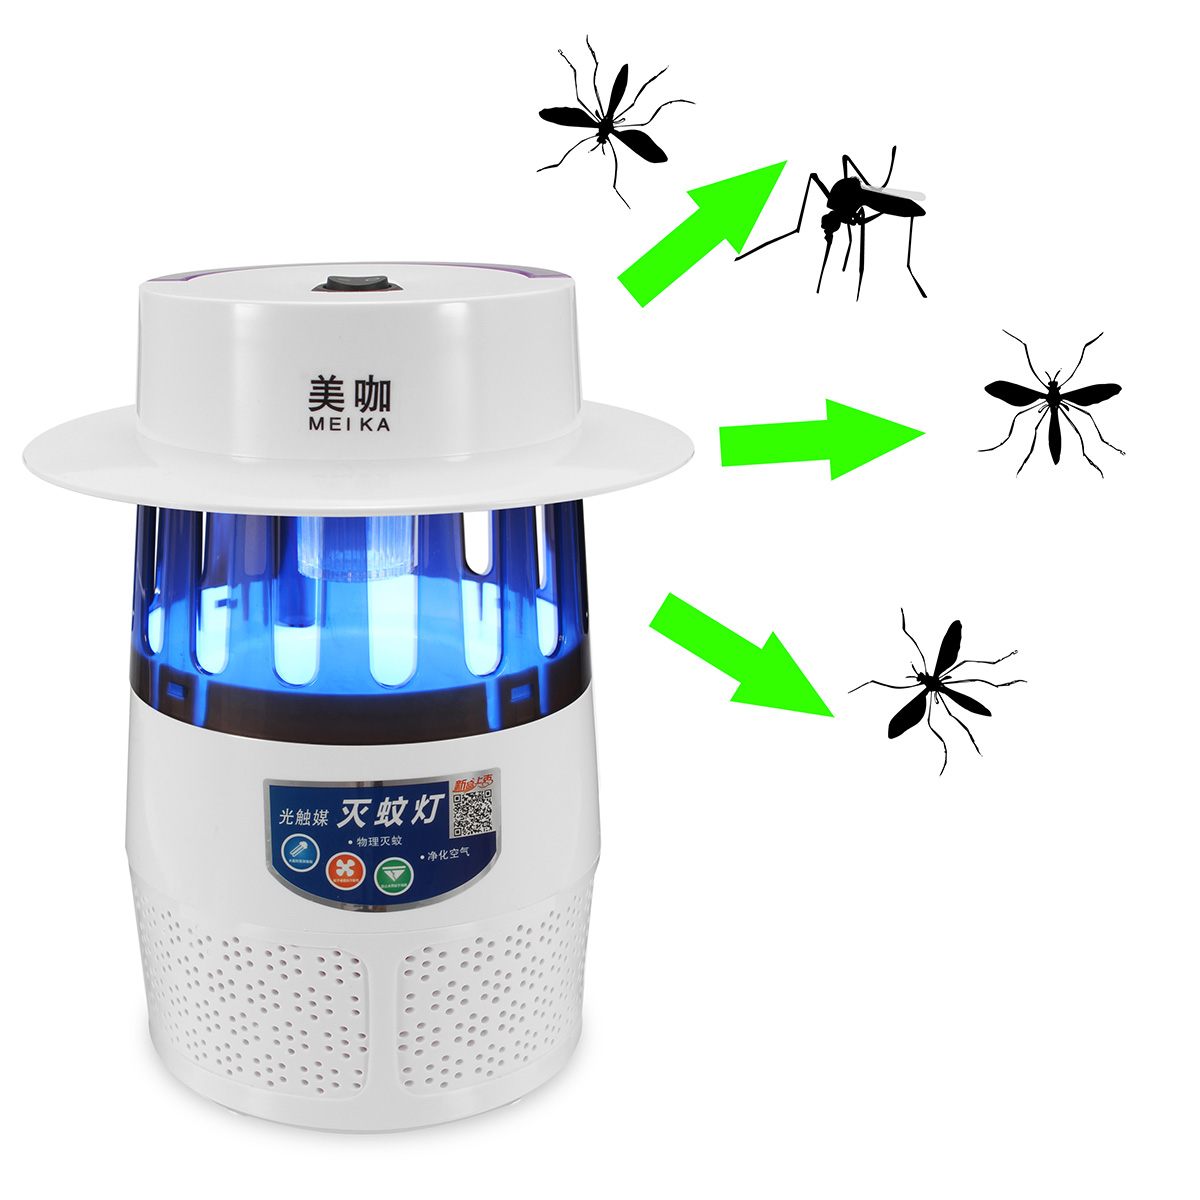 5W-LED-USB-Mosquito-Dispeller-Repeller-Mosquito-Killer-Lamp-Bulb-Electric-Bug-Insect-Repellent-Zappe-1441245-1